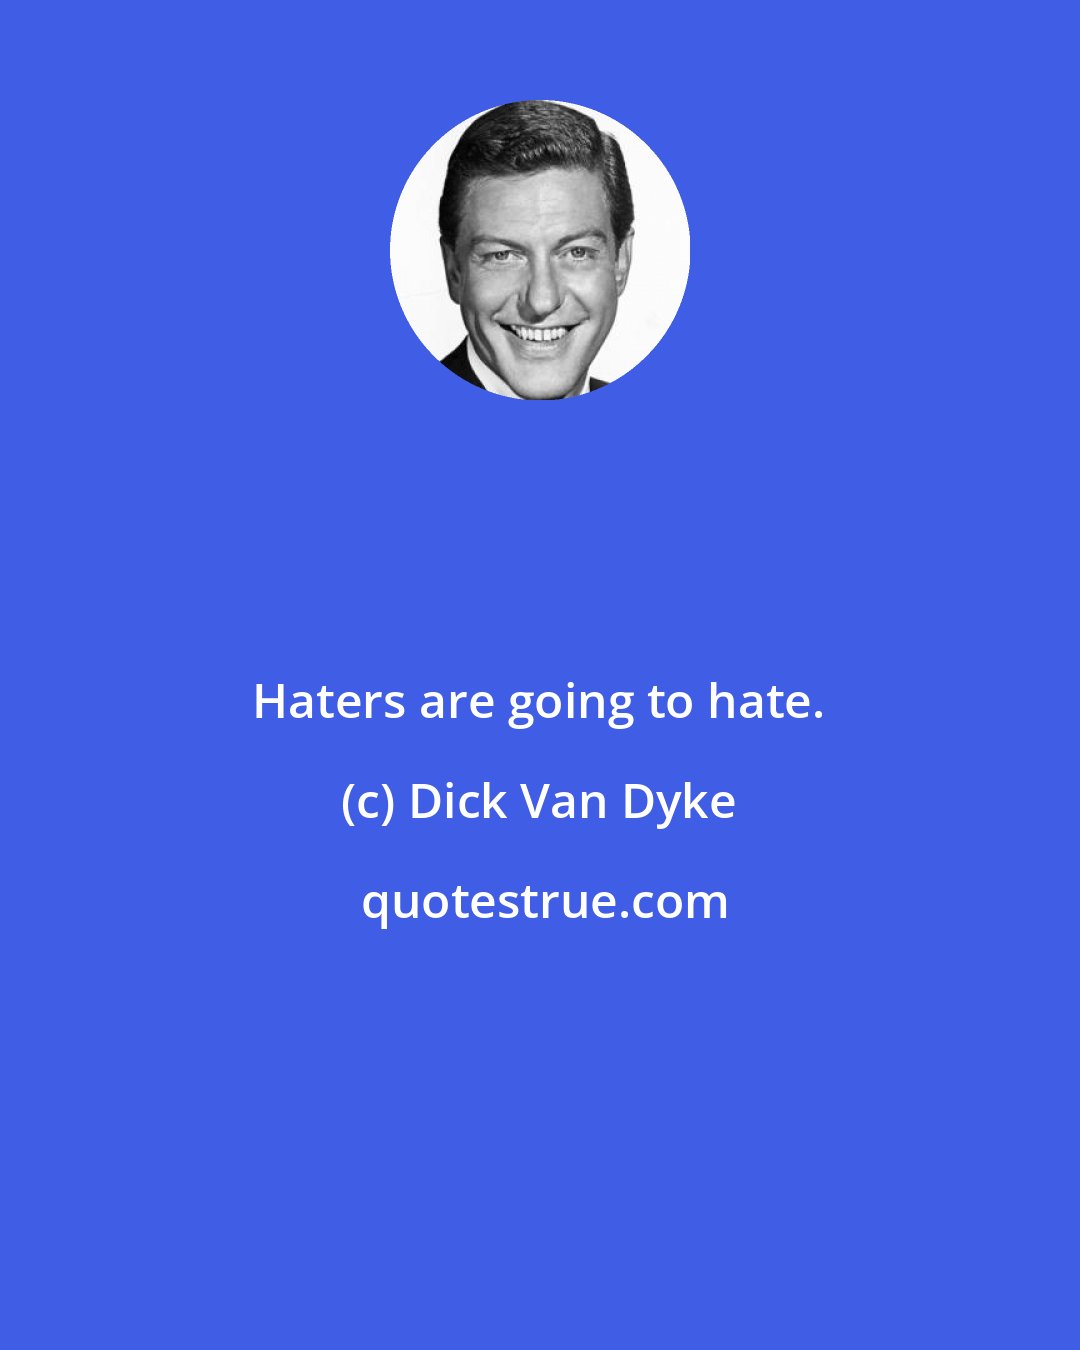 Dick Van Dyke: Haters are going to hate.